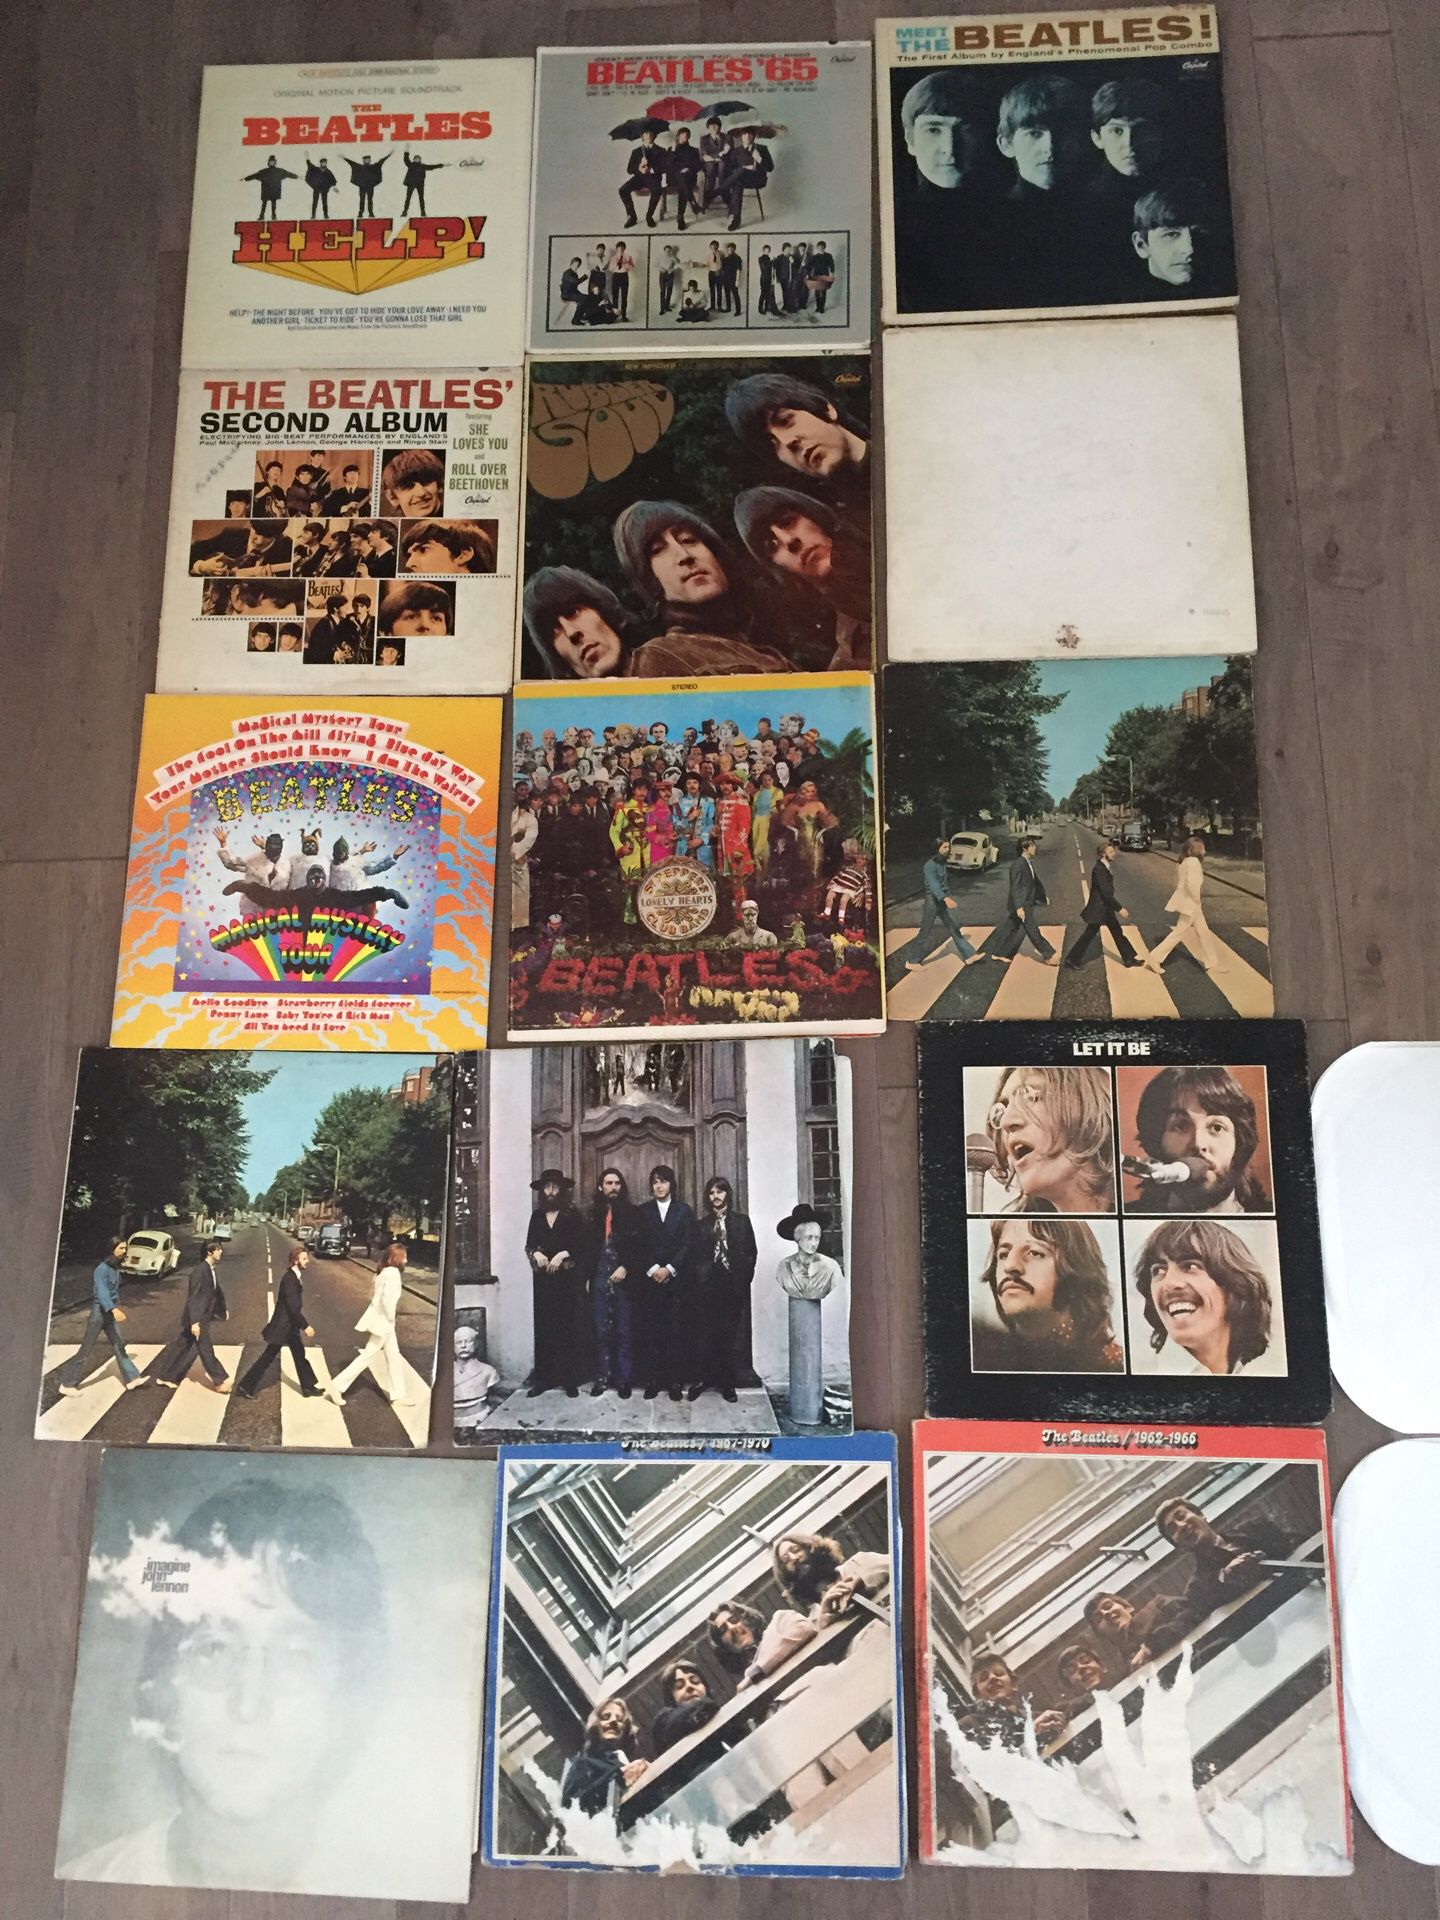 The Beatles Vinyl collection